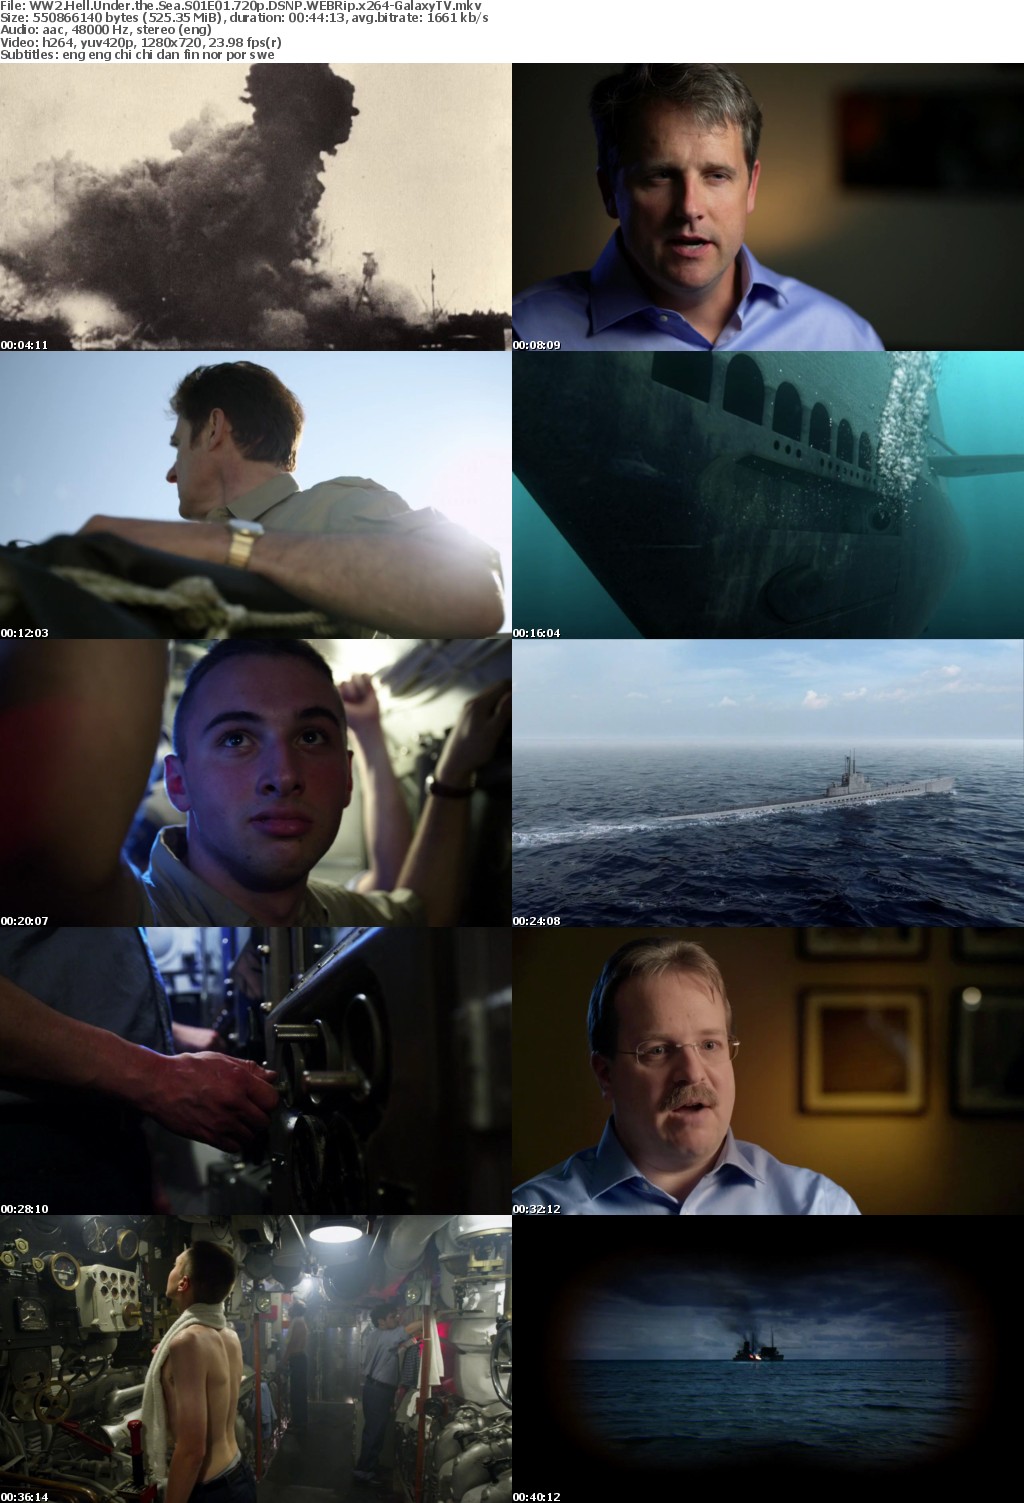 WW2 Hell Under the Sea S01 COMPLETE 720p DSNP WEBRip x264-GalaxyTV